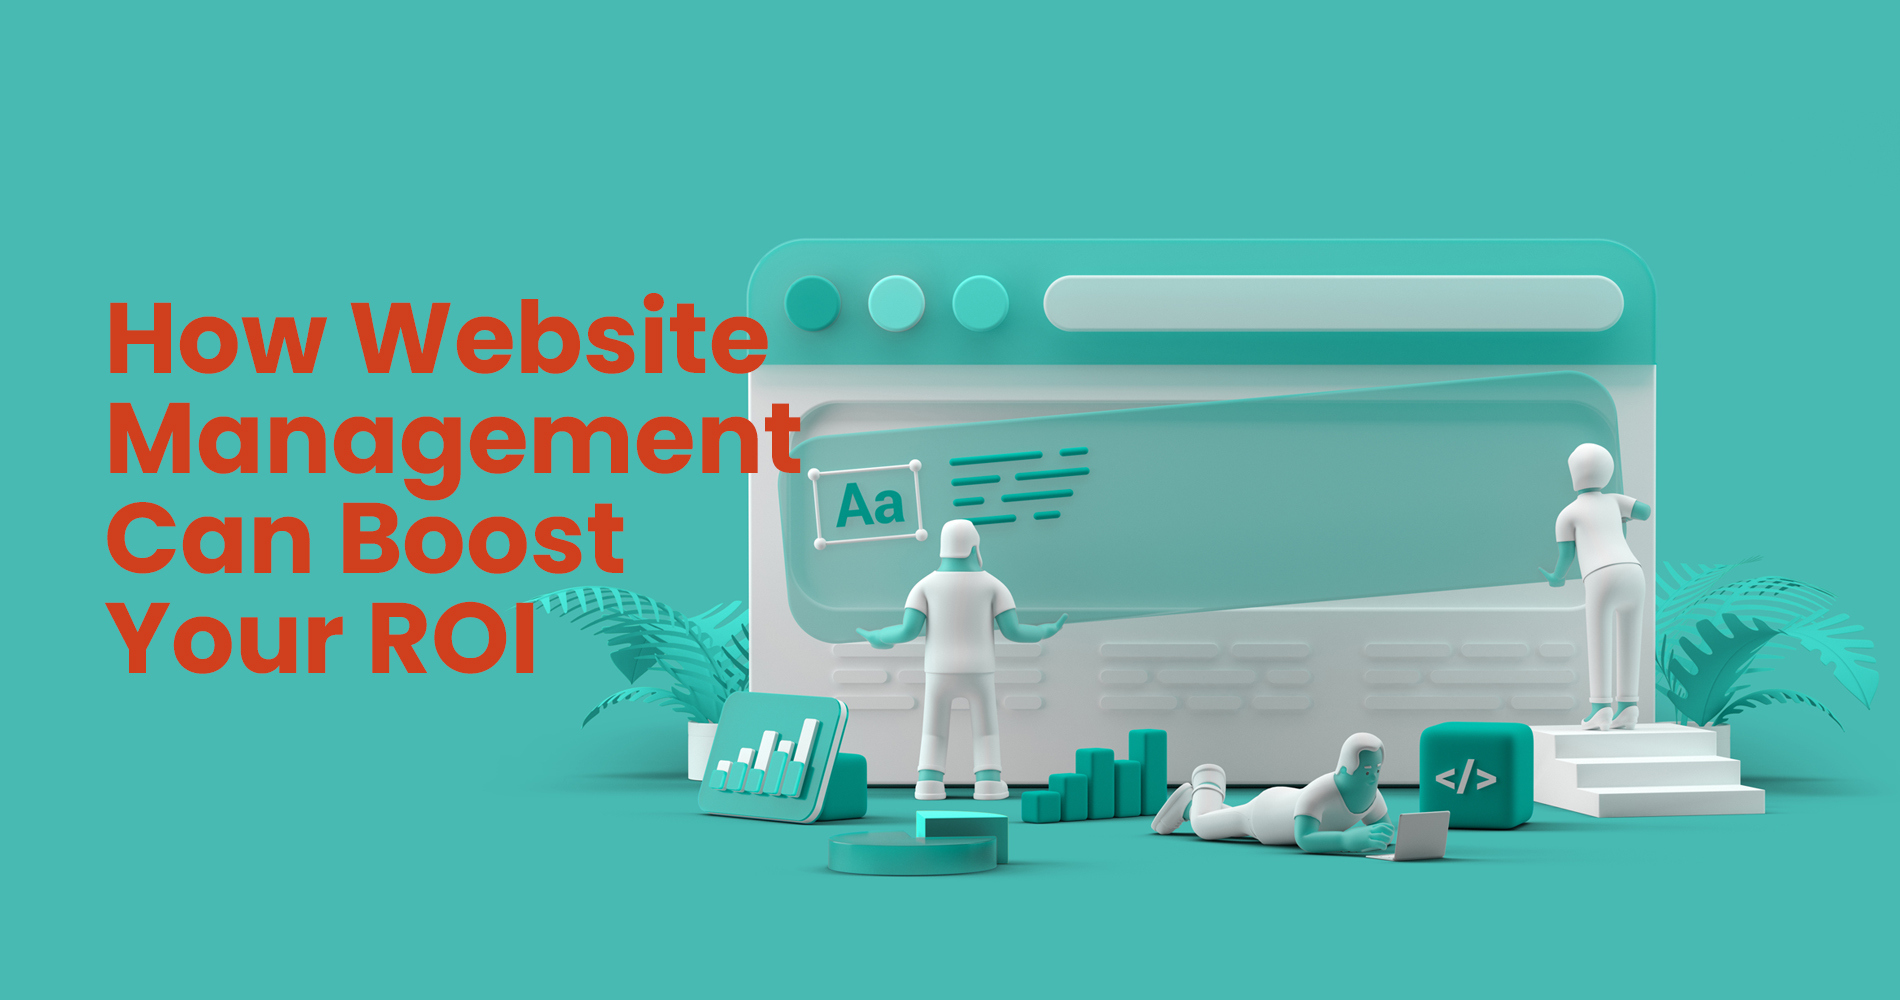 How Website Management Can Boost Your ROI